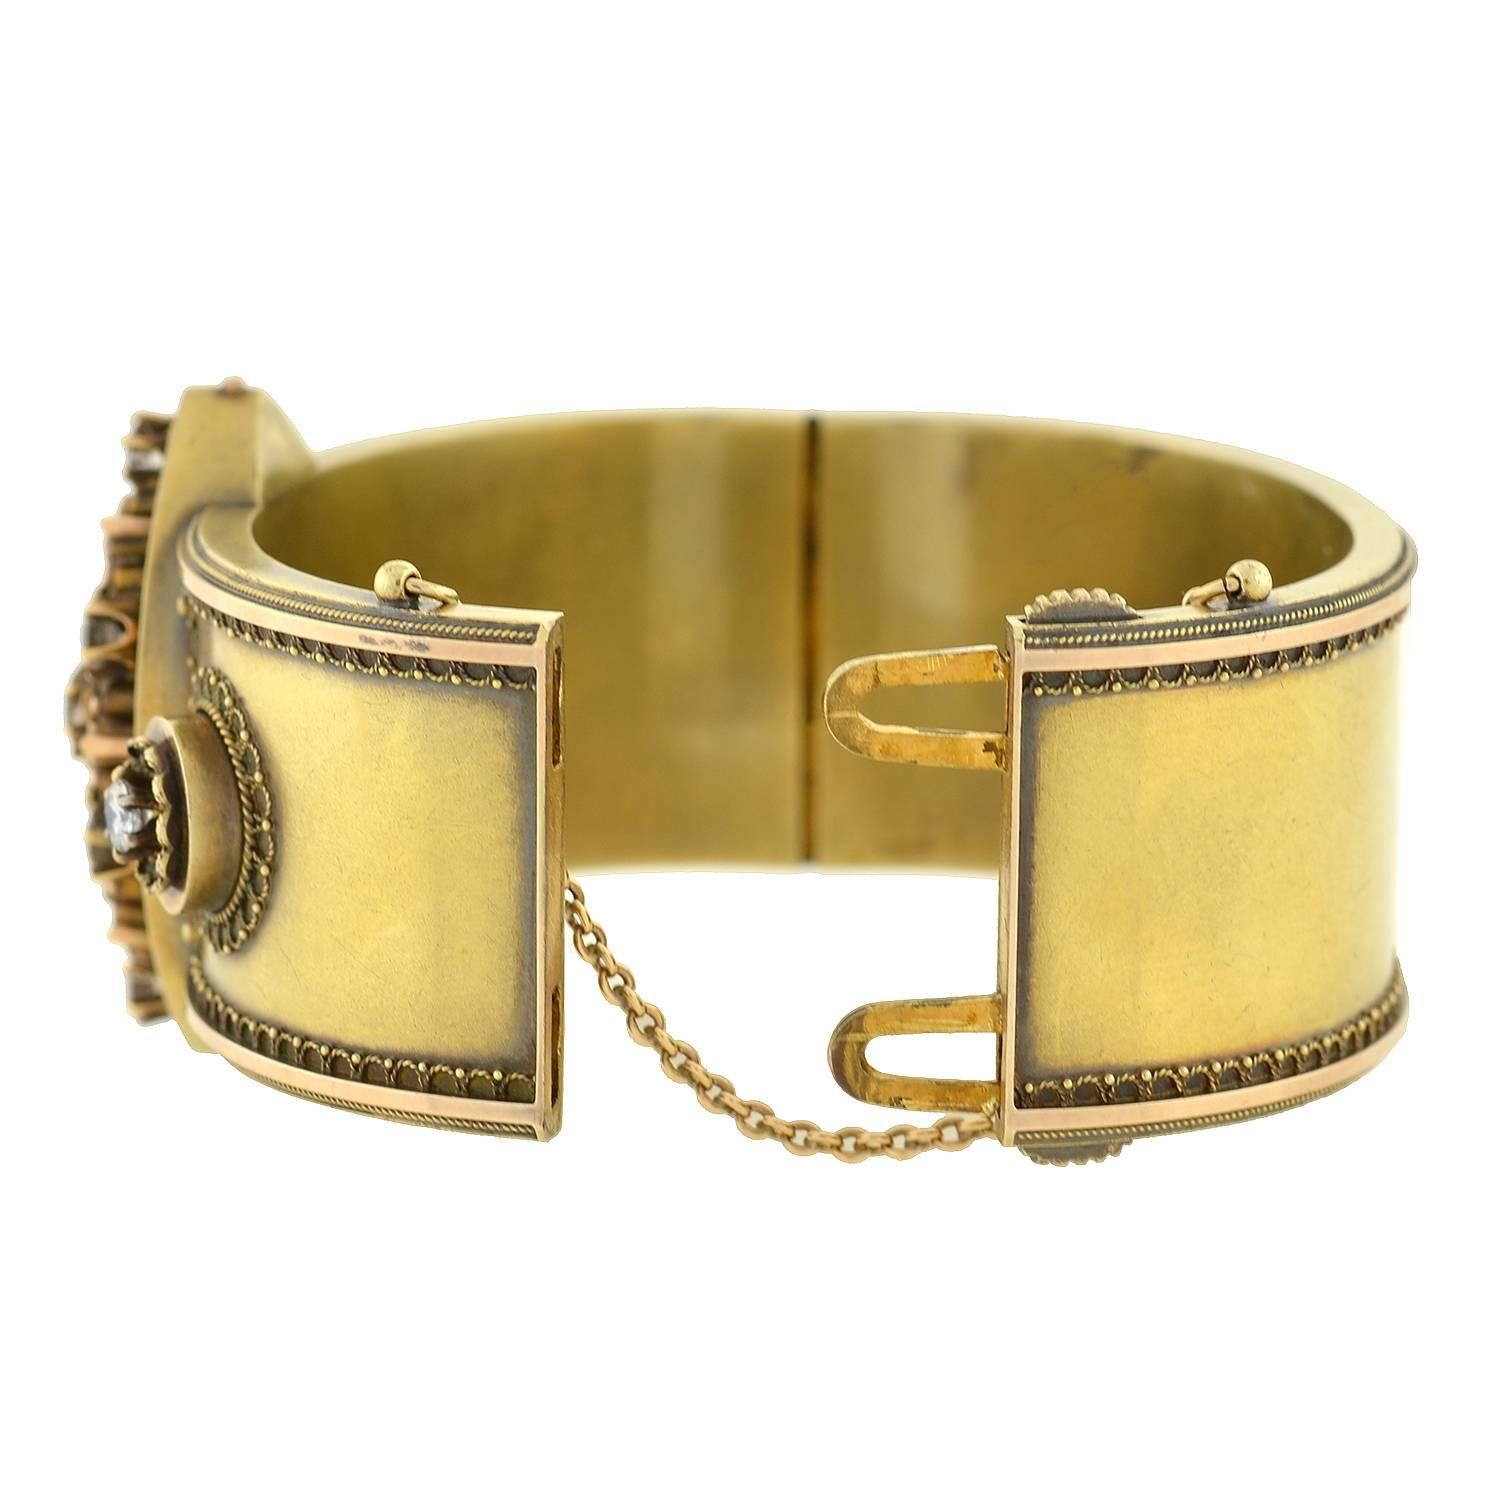 An absolutely exquisite gold bangle bracelet from the Victorian (ca1880) era! This wide bangle is made of vibrant 15kt yellow gold and has a fantastic 3-dimensional design on the front surface. At the center of the bangle is an oval shaped plaque